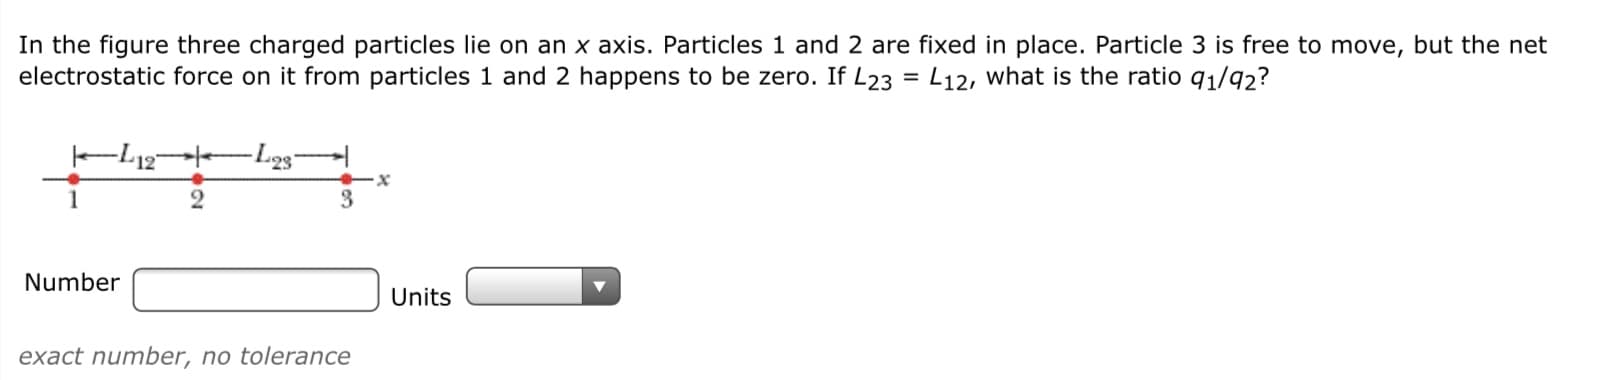 In the figure three charged particles lie on an x axis. Particles 1 and 2 are fixed in place. Particle 3 is free to move, but the net
electrostatic force on it from particles 1 and 2 happens to be zero. If L23 = L12, what is the ratio q1/92?
%3D
1
3.
Number
Units
